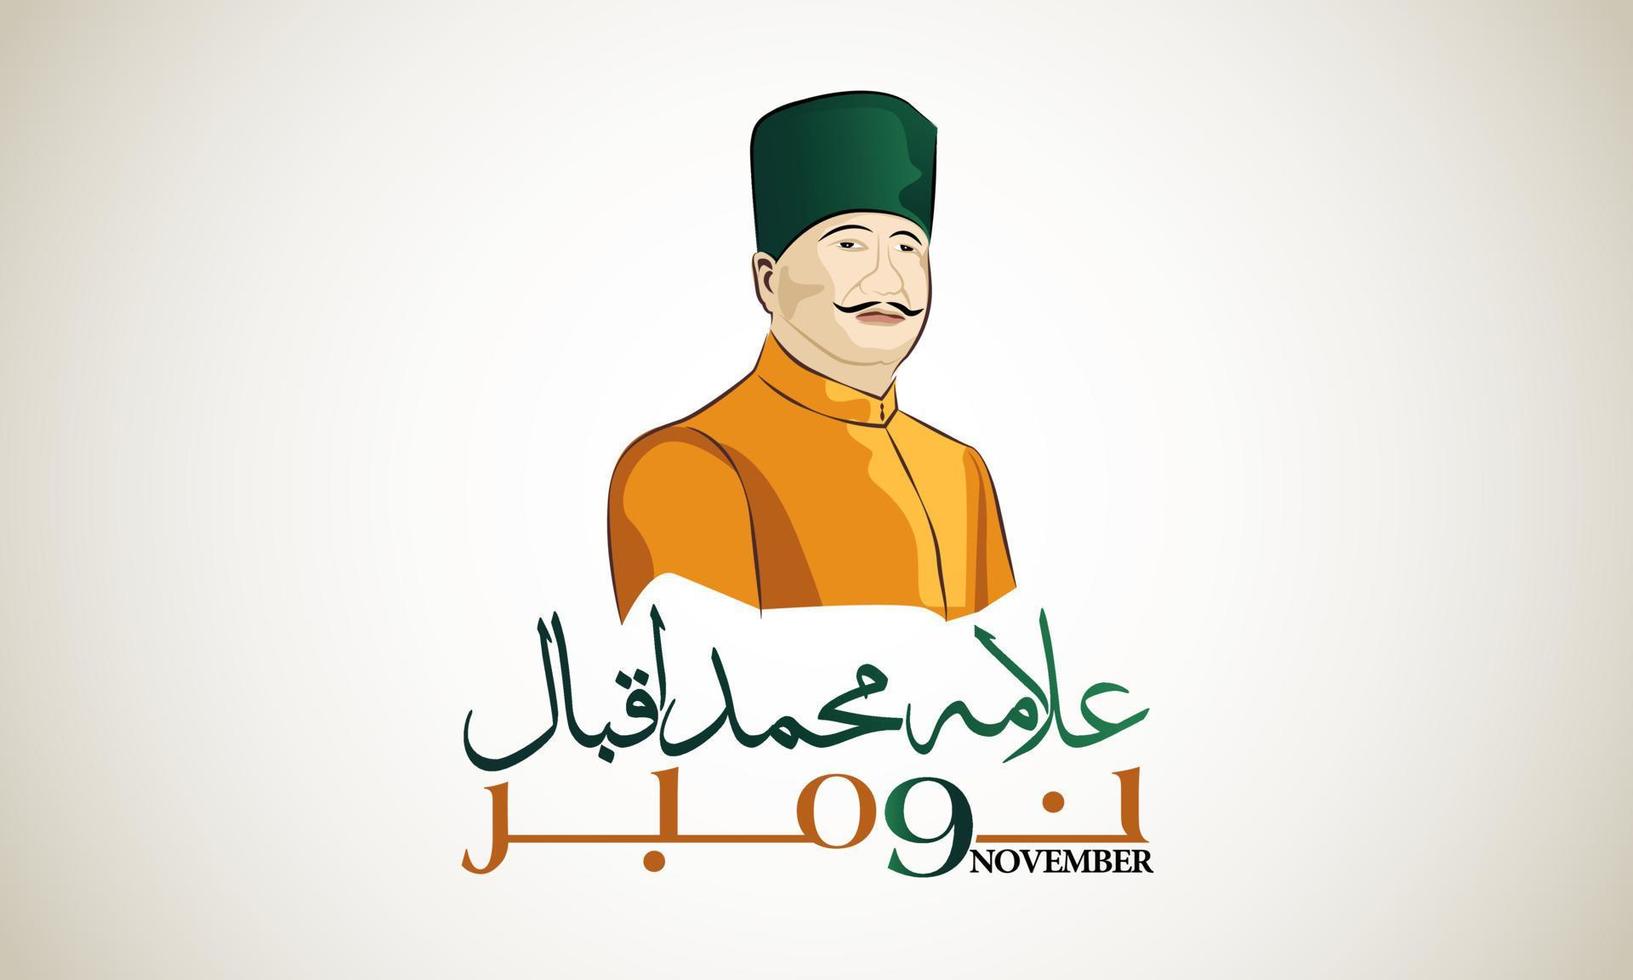 Iqbal Beautiful Sketch Design With Beautiful Calligrpahy and Typography vector